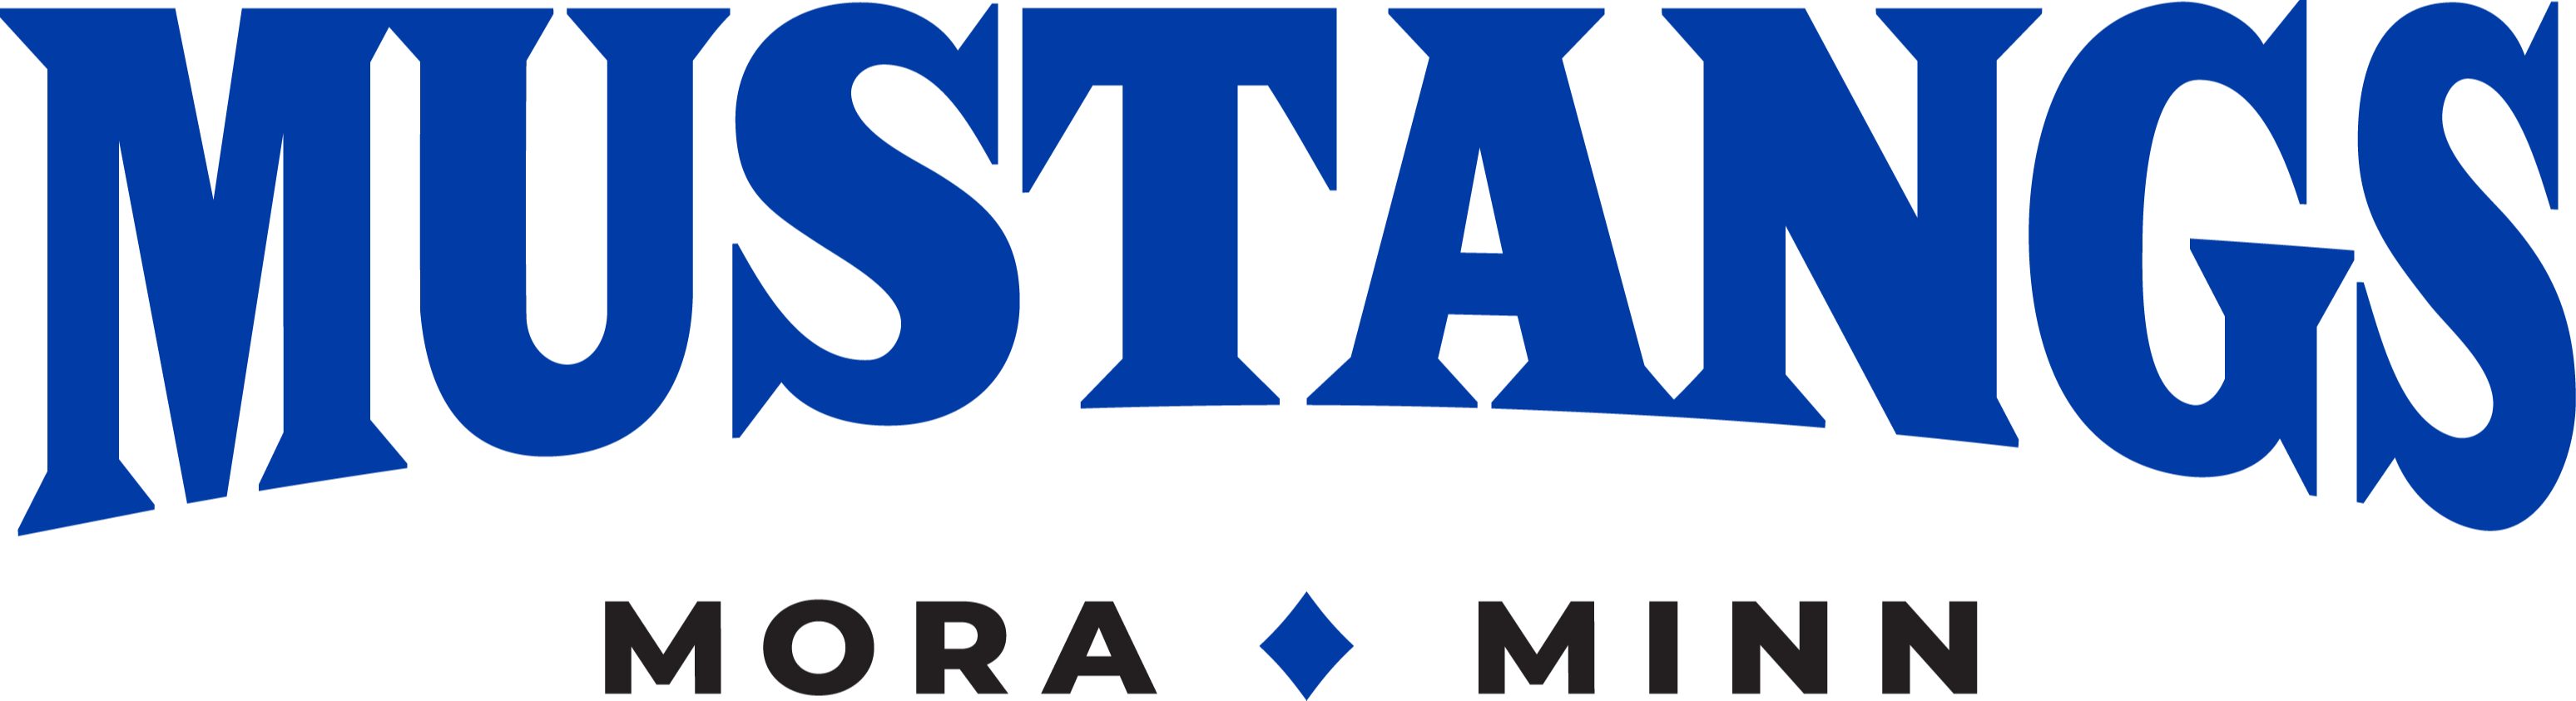 Mora mustang logo on blue background with text reading "Mora Public Schools Student Registration